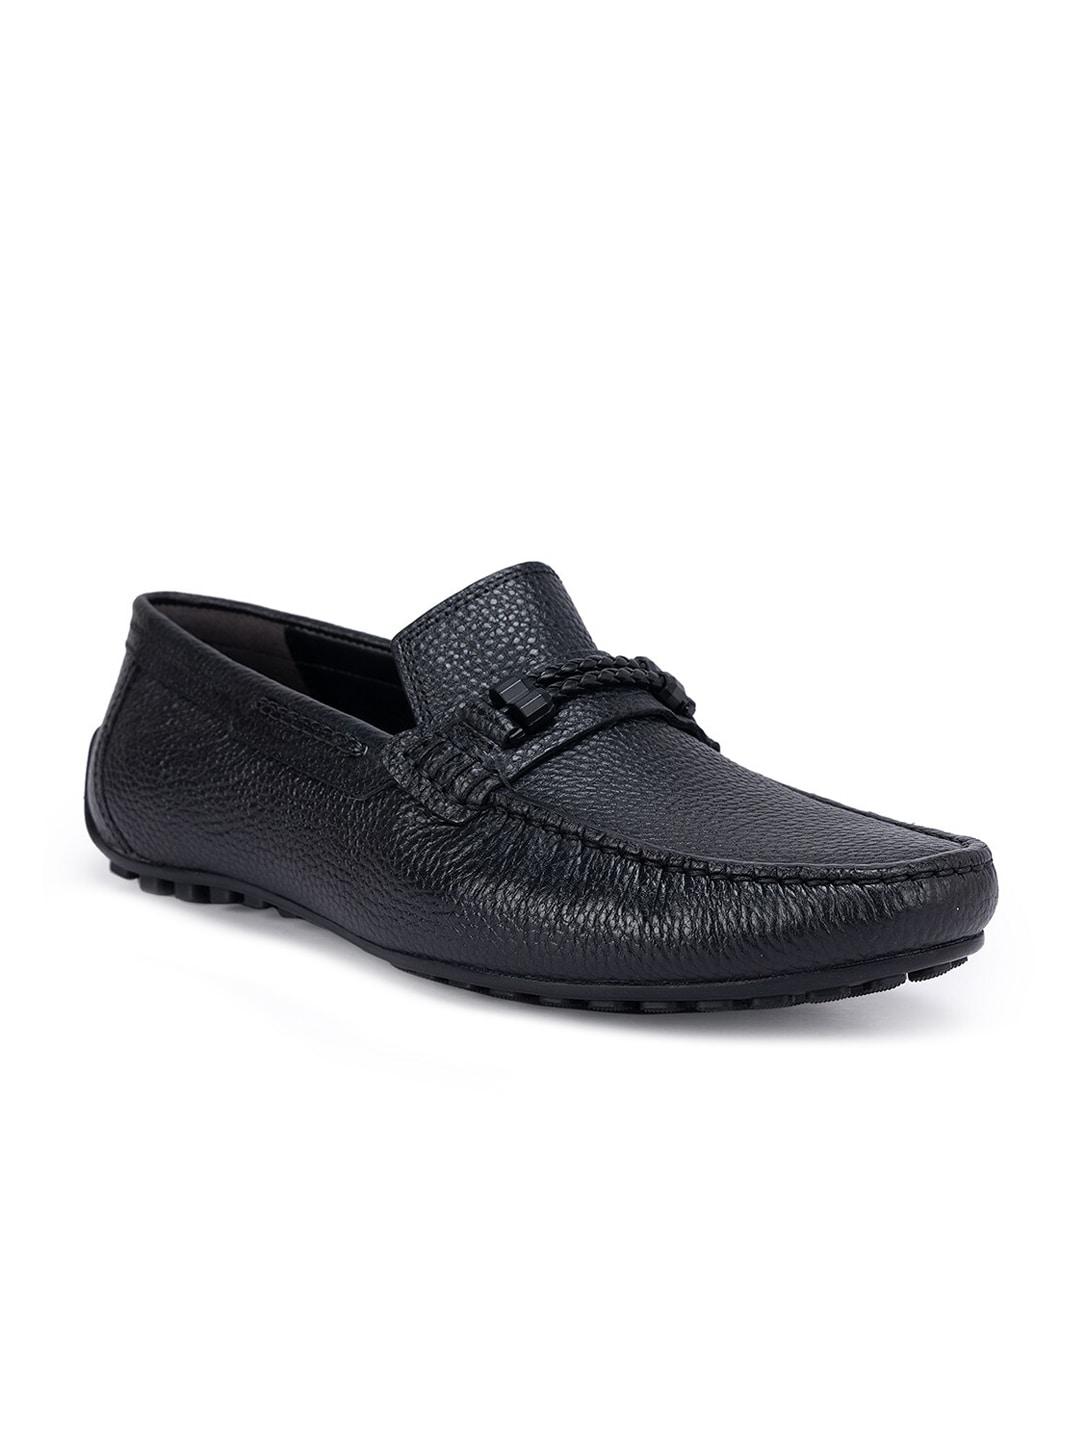 ROSSO BRUNELLO Men Textured Leather Formal Loafers